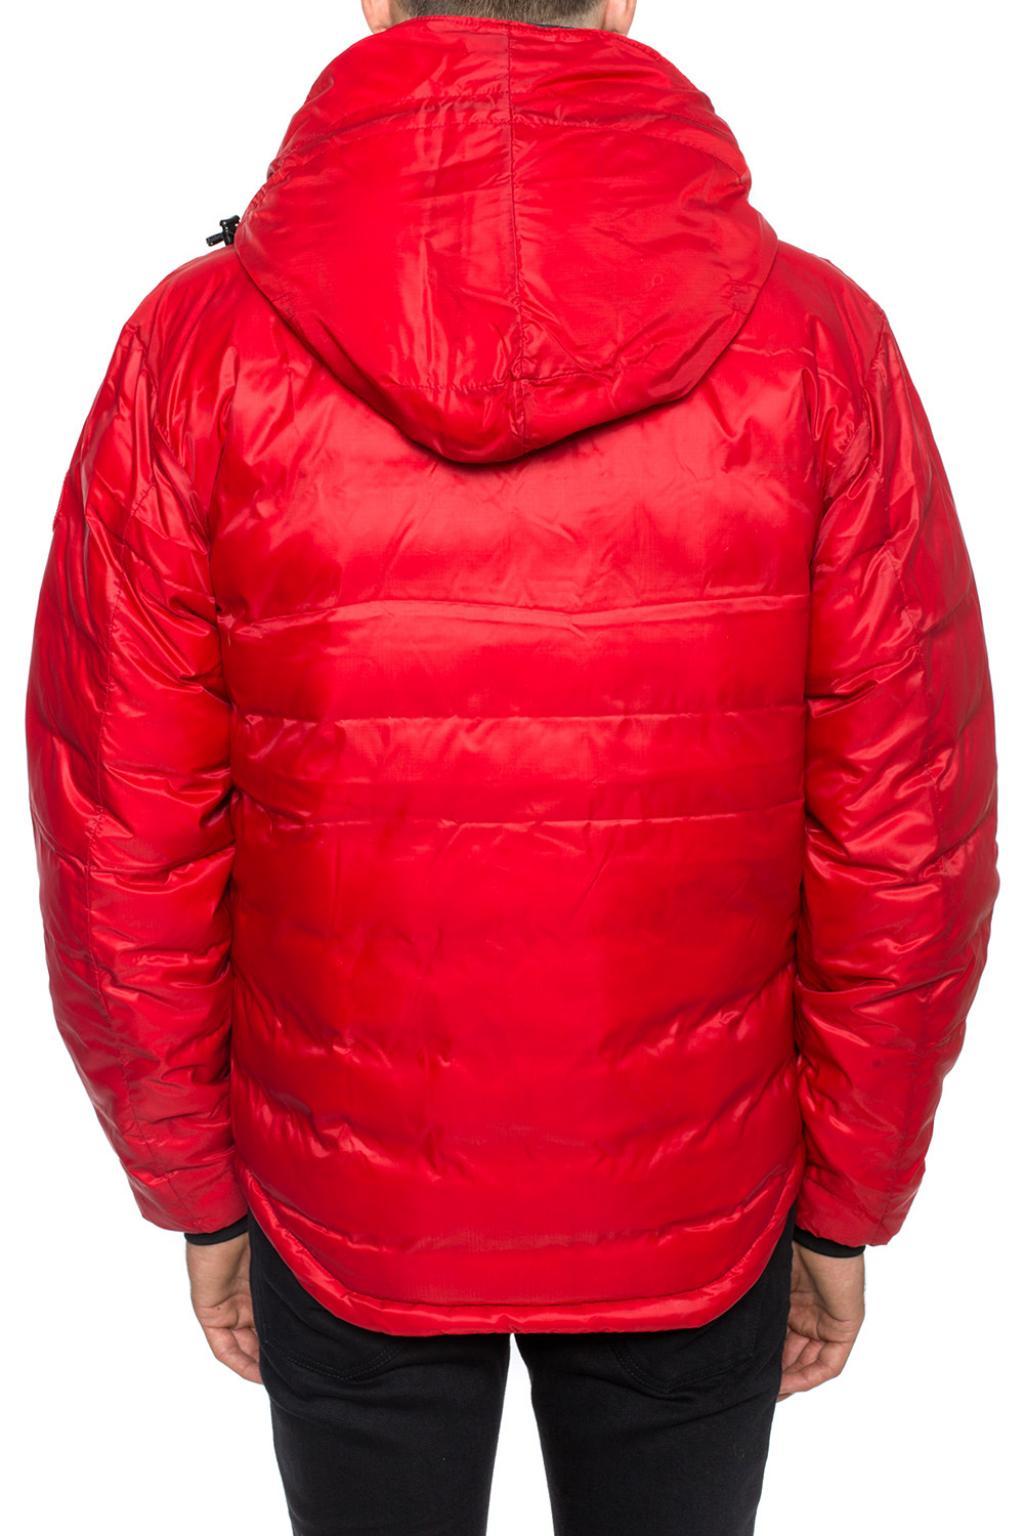 Canada Goose Goose 'lodge' Hooded Down Jacket in Red for Men - Lyst